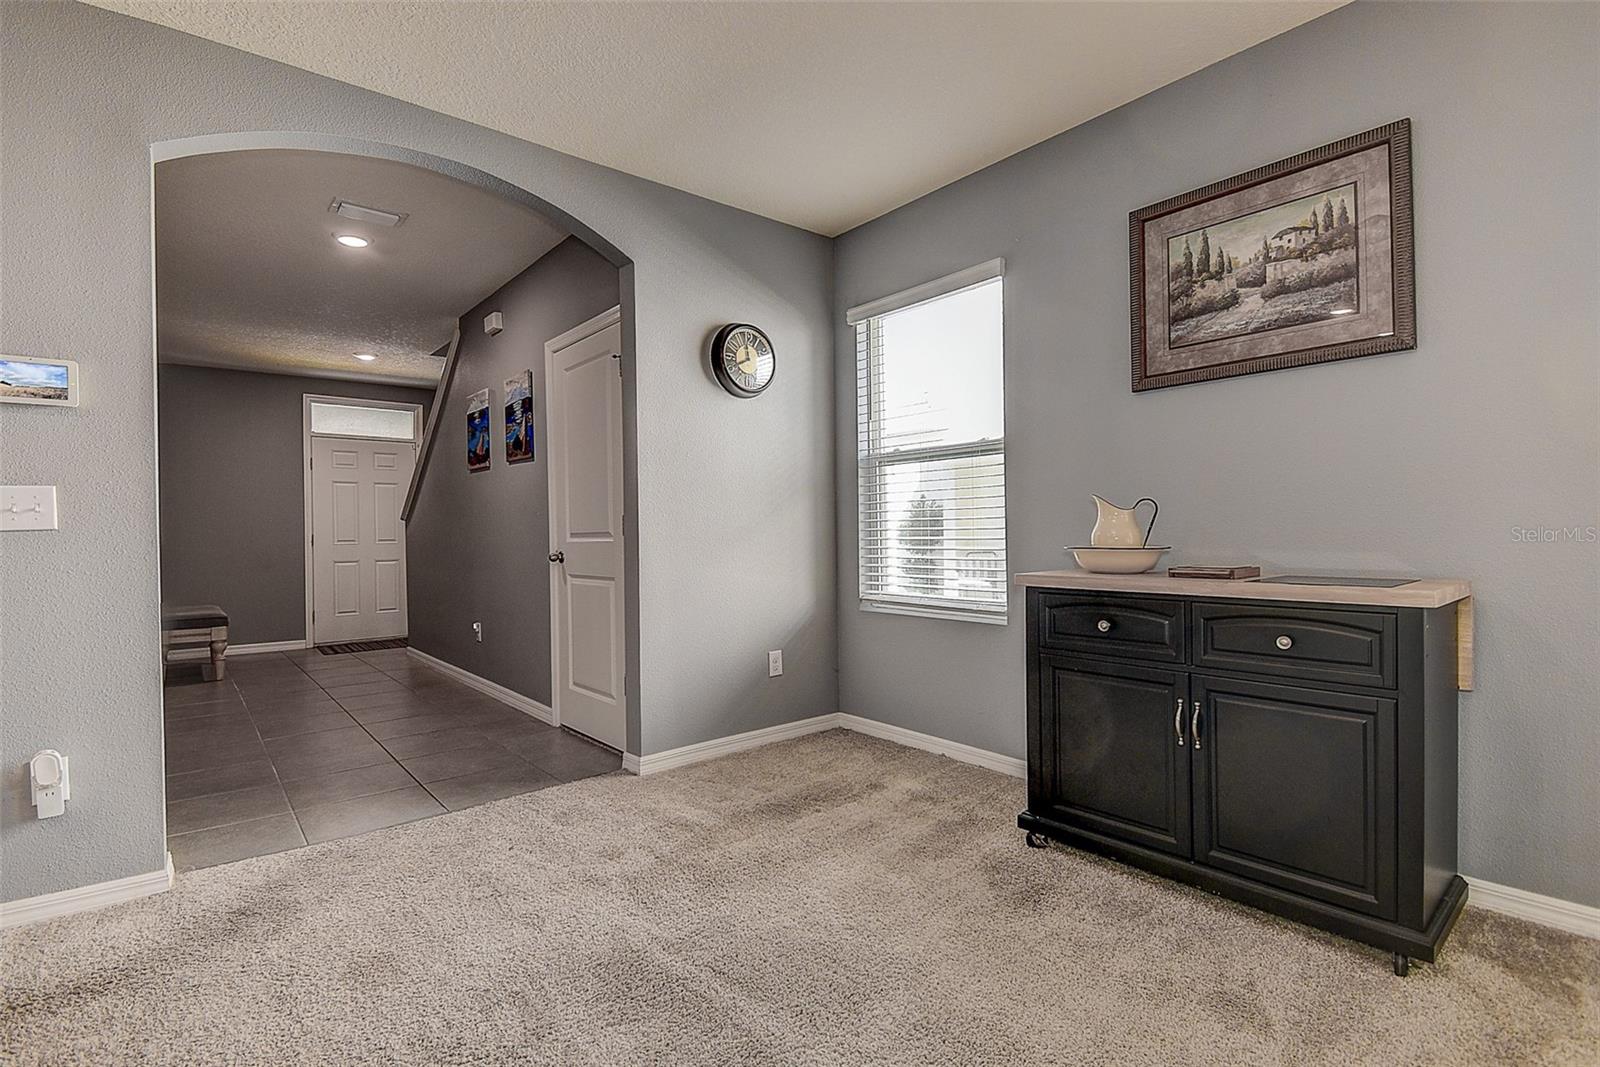 Large foyer with walk-in under stairs closet.